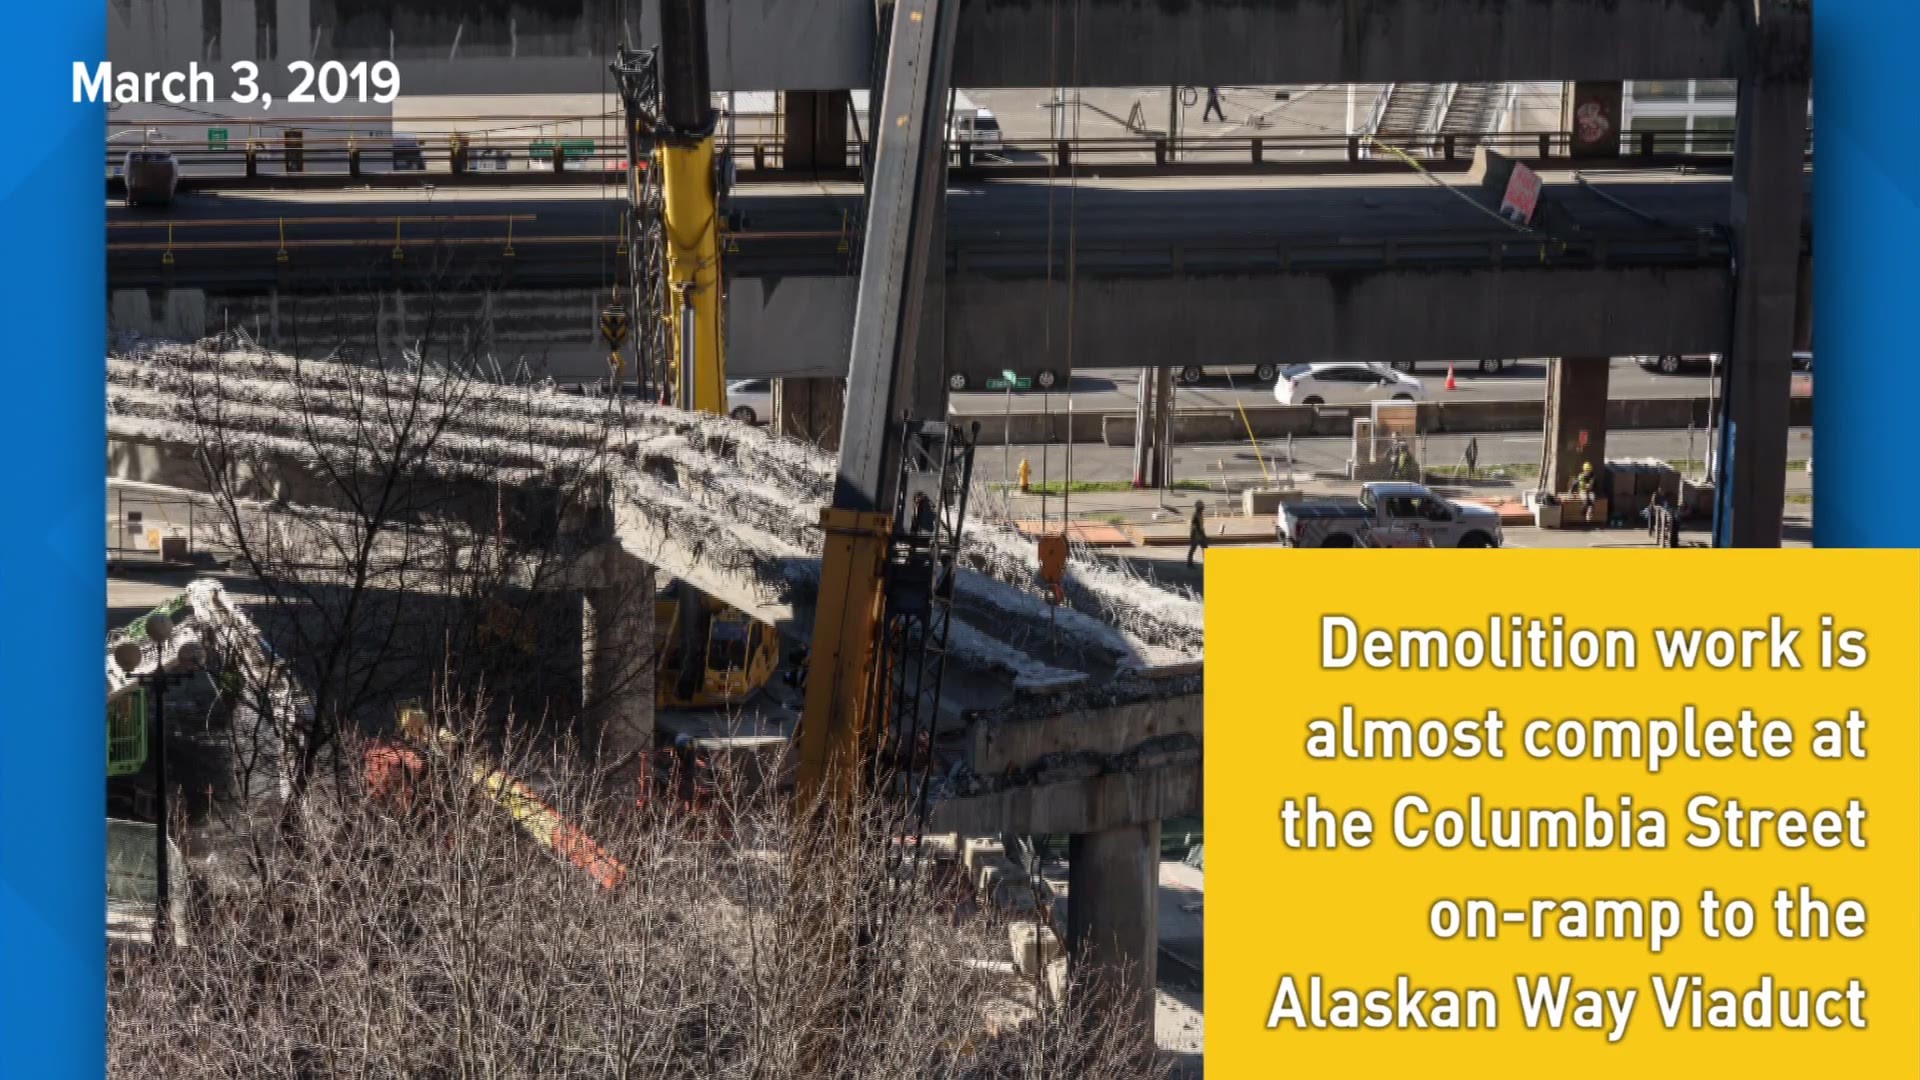 Photos of the Alaskan Way Viaduct demolition work on the Columbia Street on-ramp and the Western Avenue off-ramp on March 3, 2019.